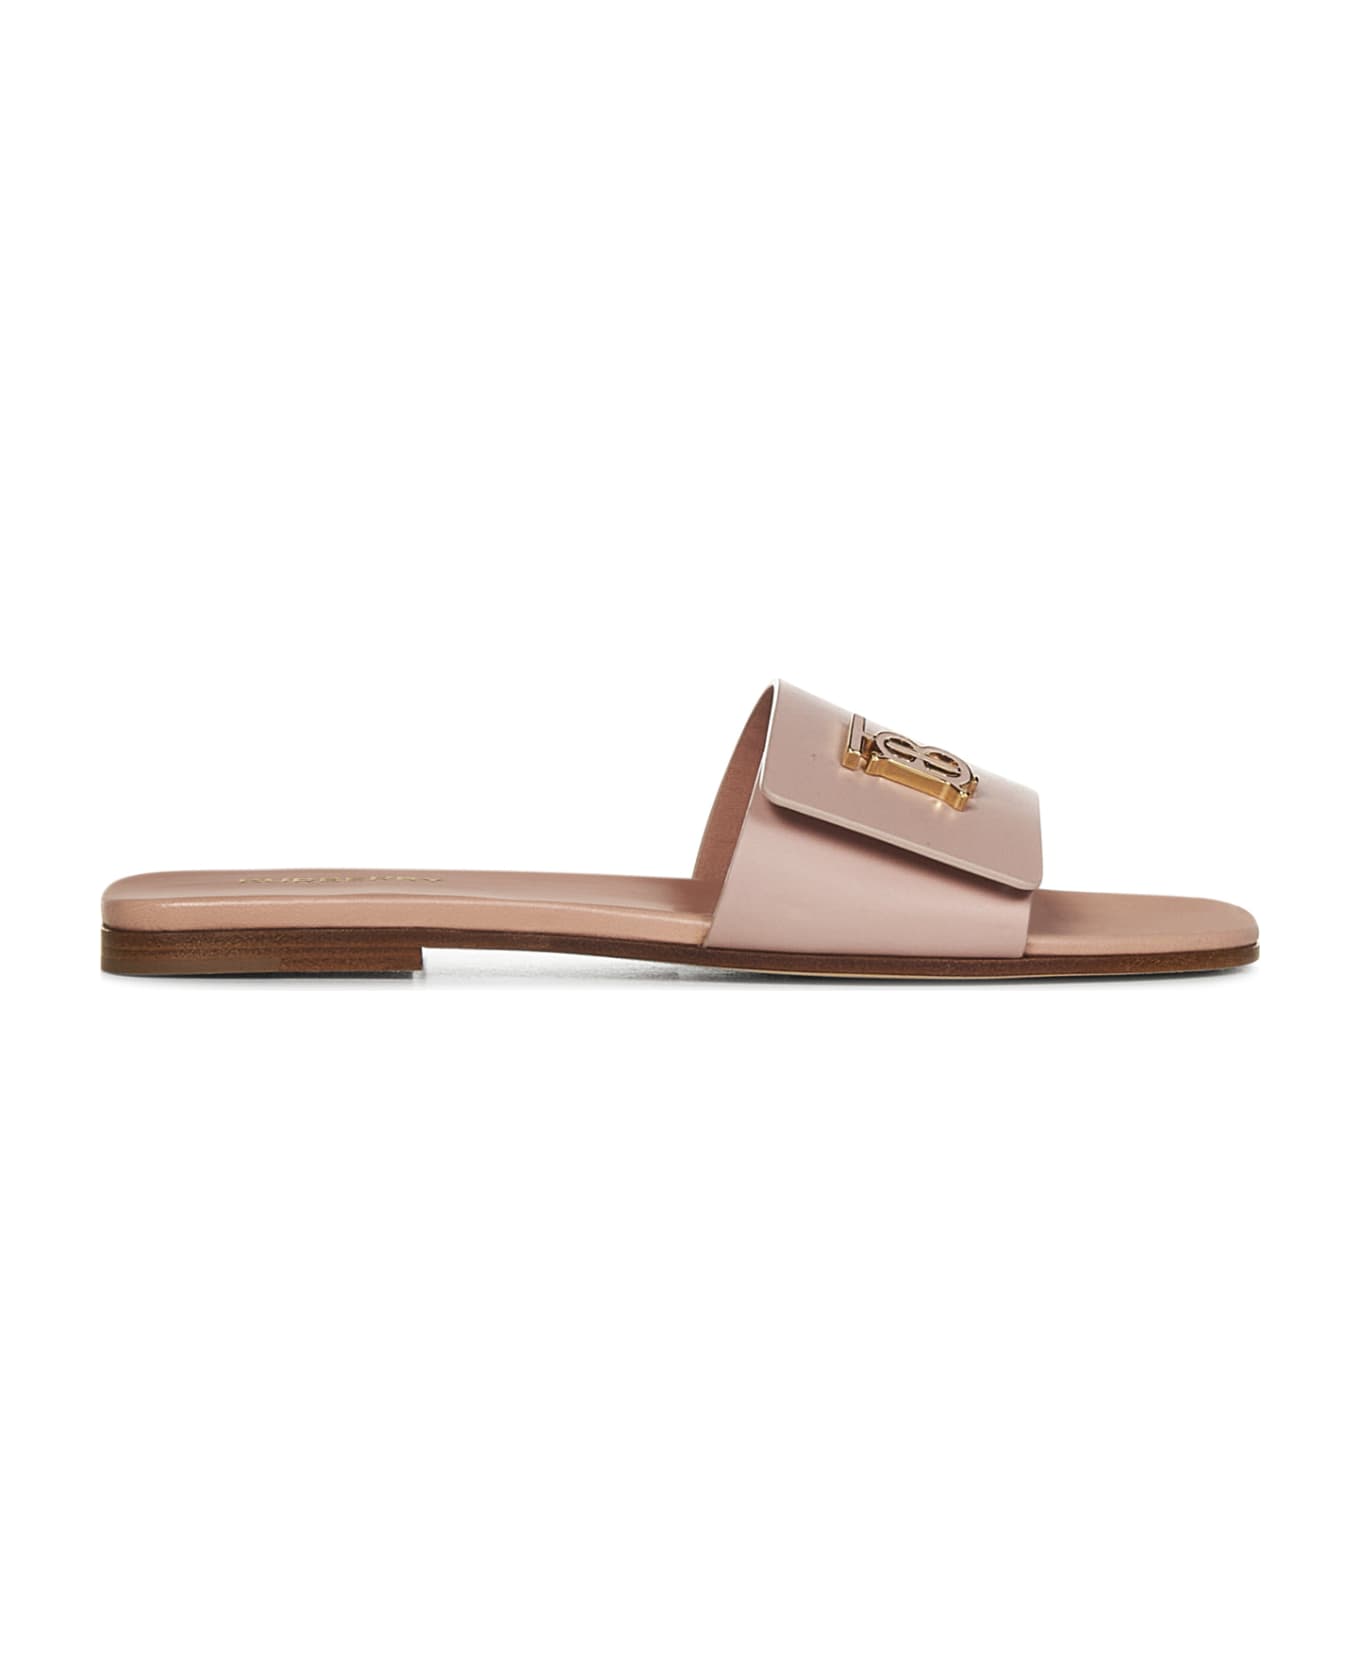 Burberry Powder Pink Leather Slippers - Pink サンダル